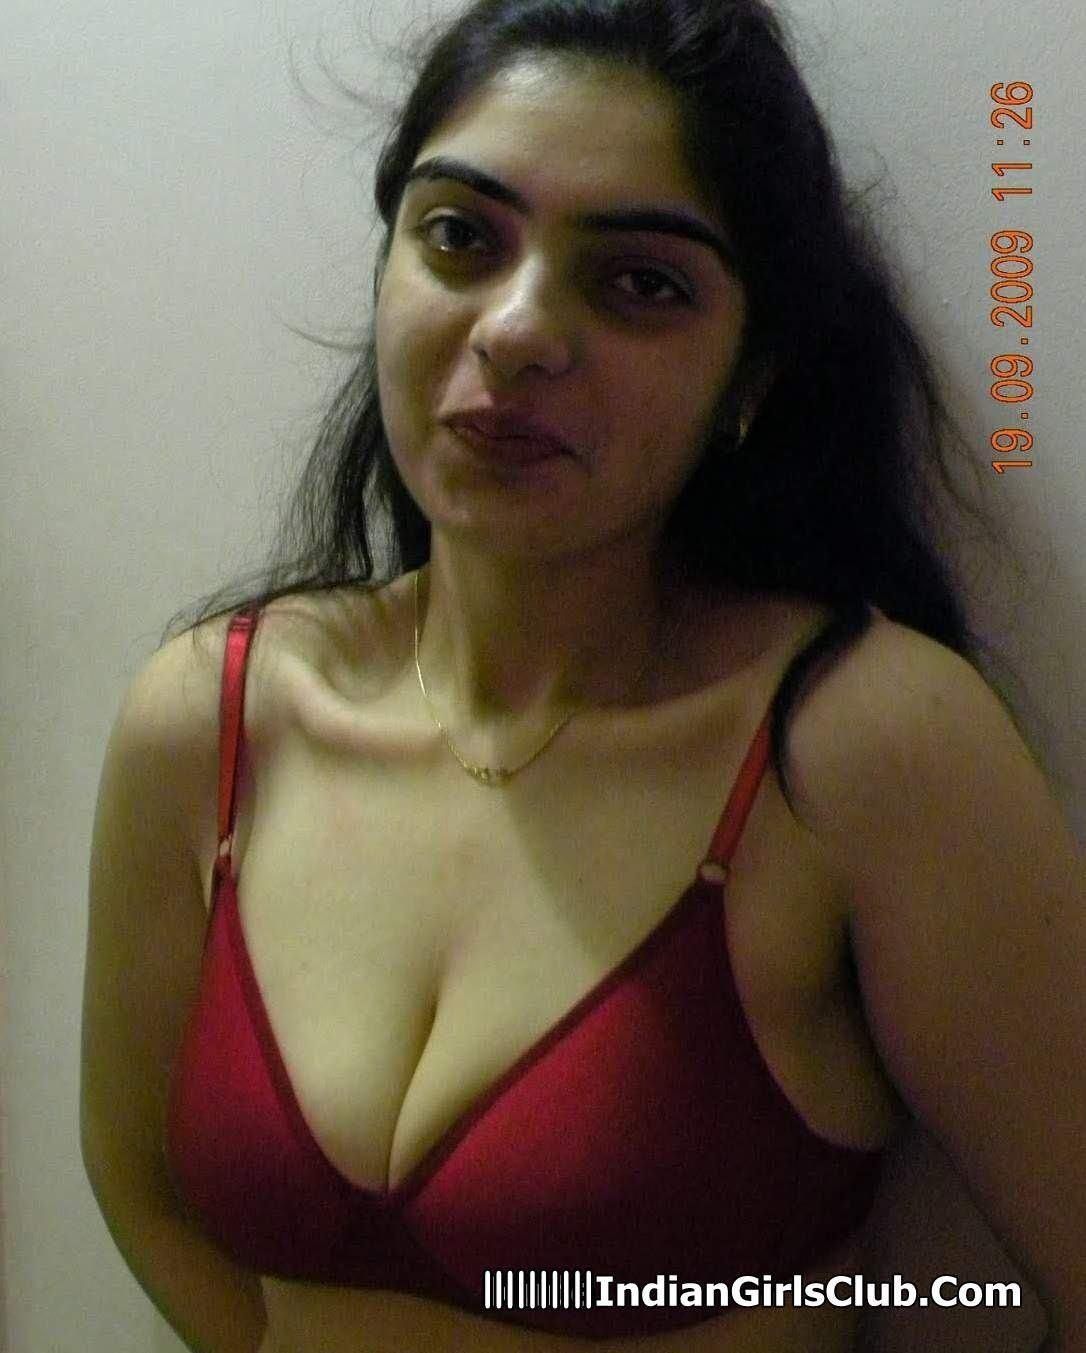 Bengali lady naked boob show selfie post in facebook